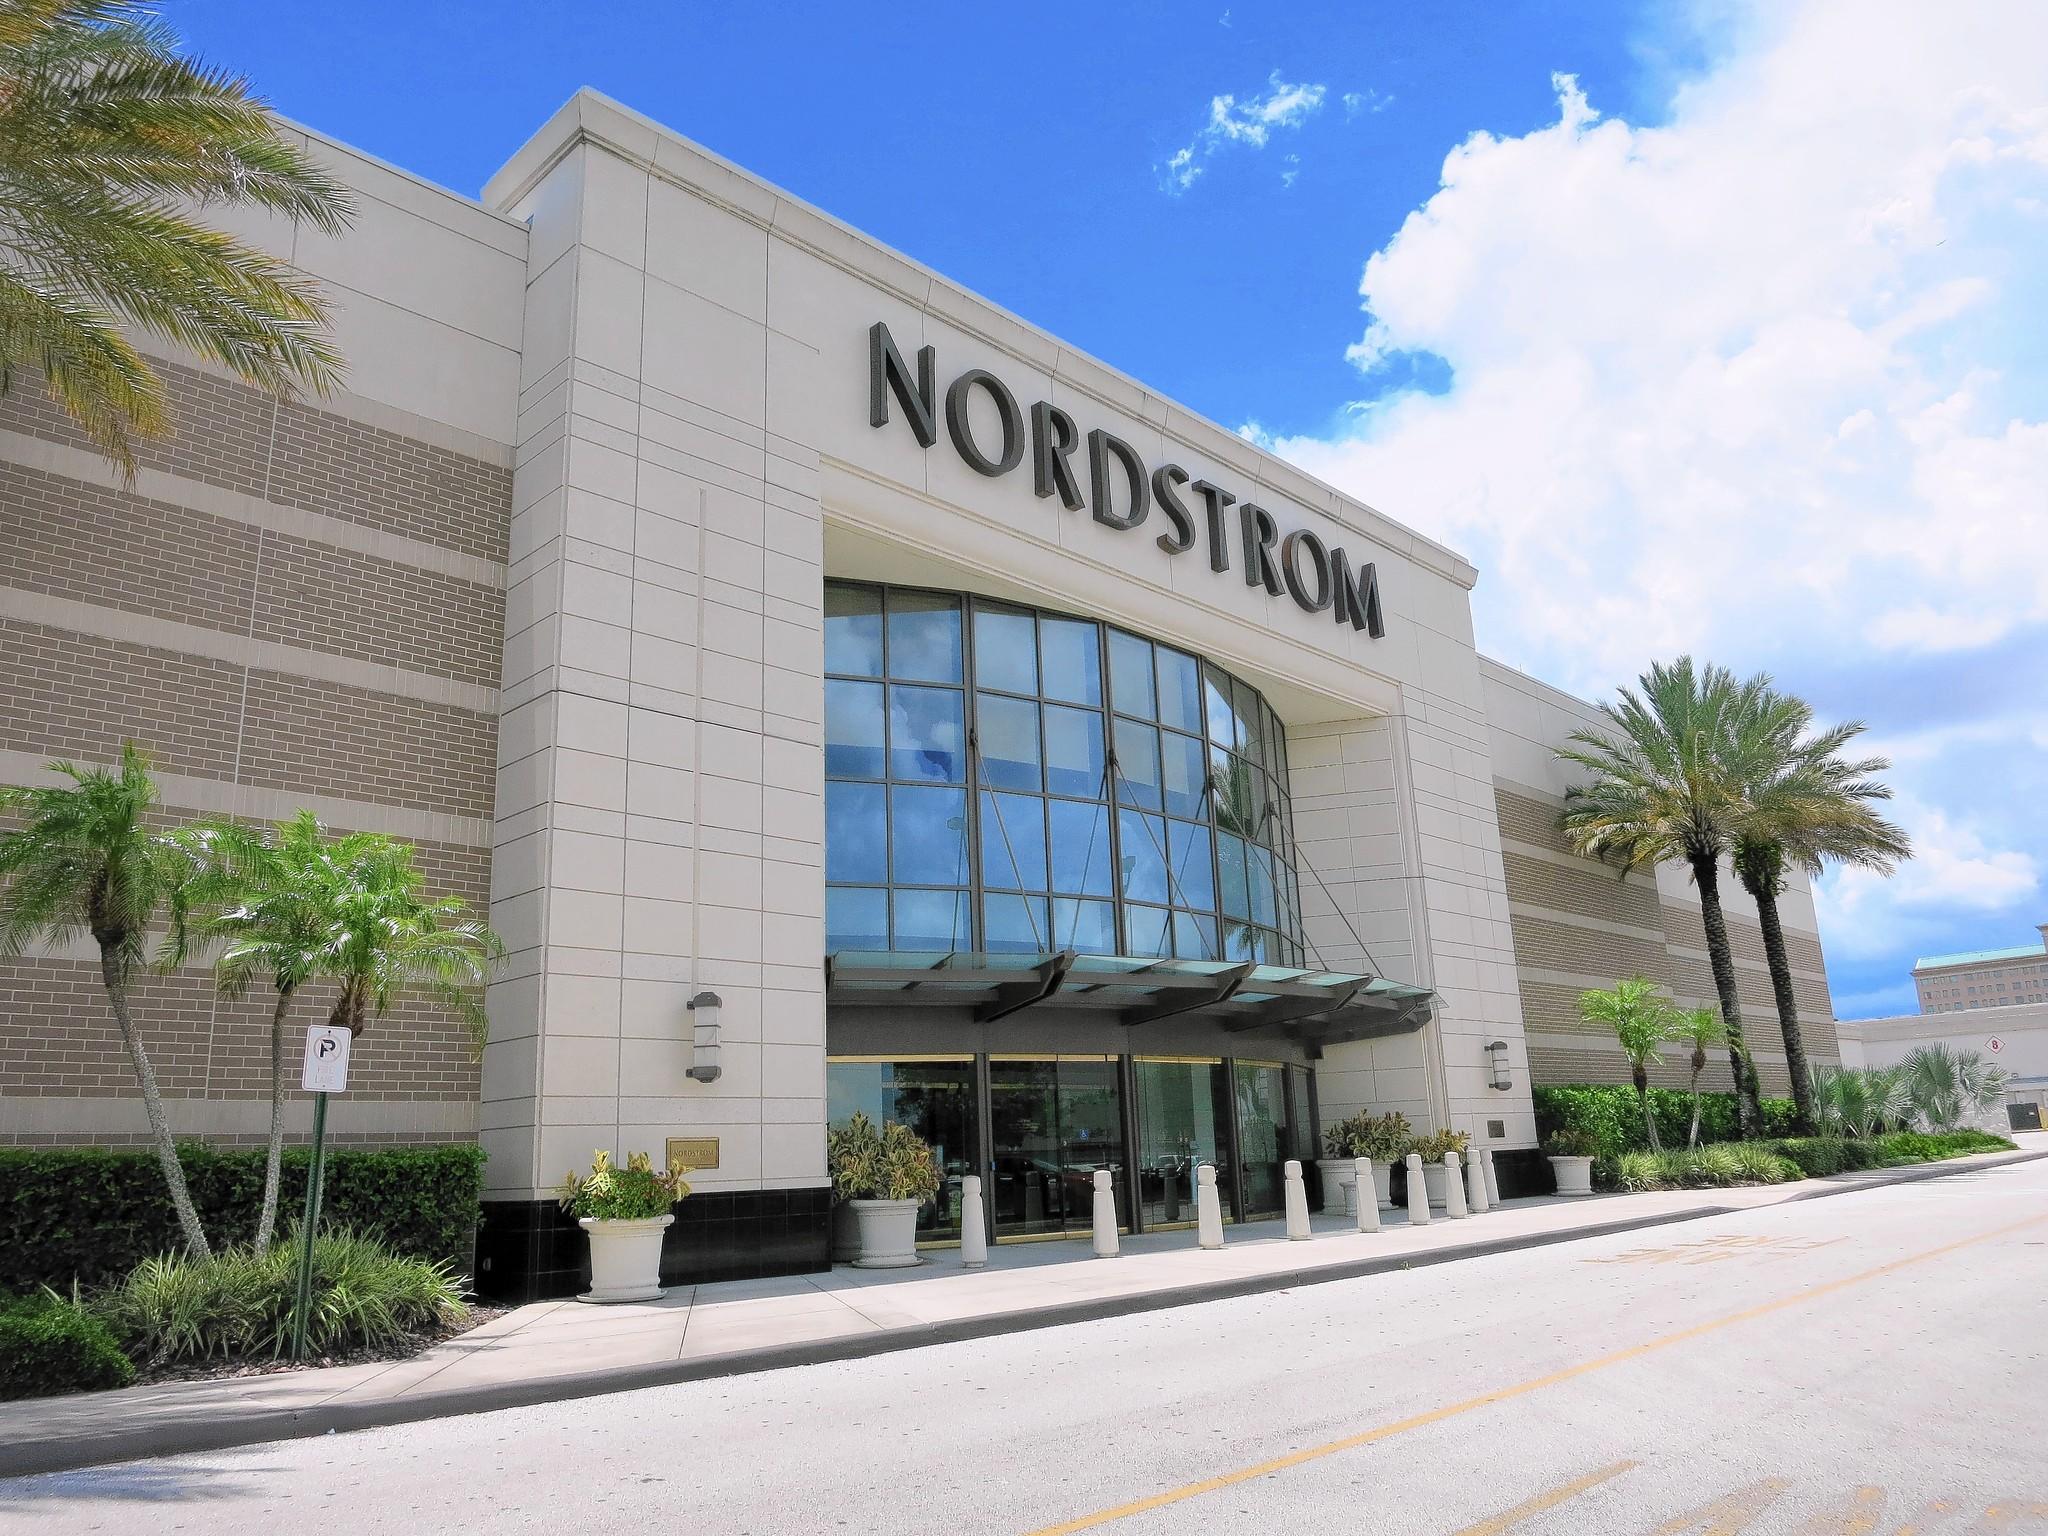 Nordstrom fell to upscale and outlet competition, analysts say